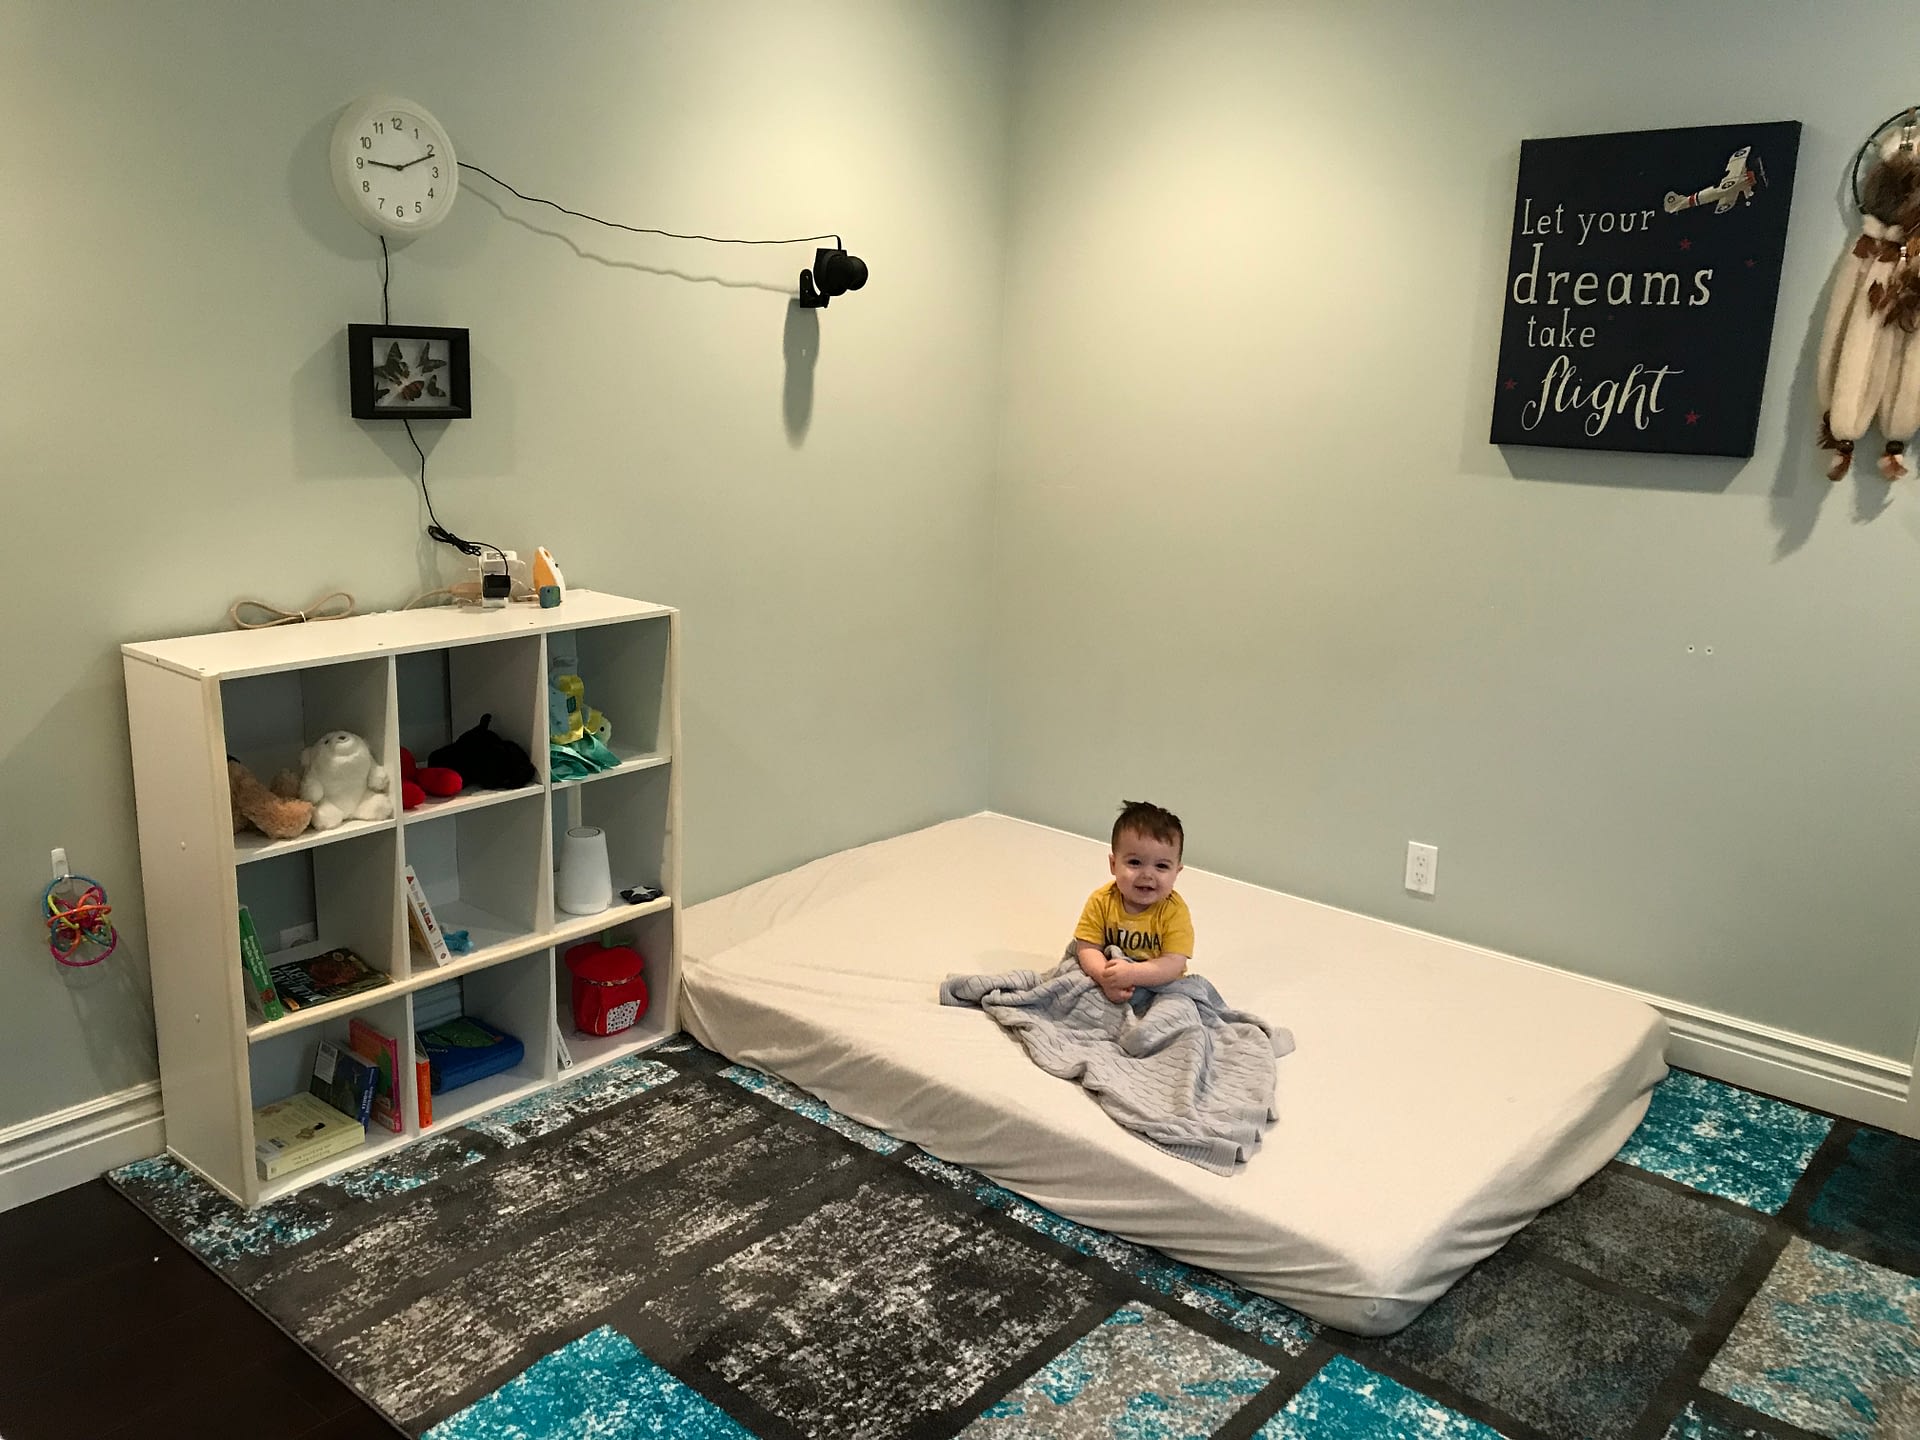 best floor beds for toddlers